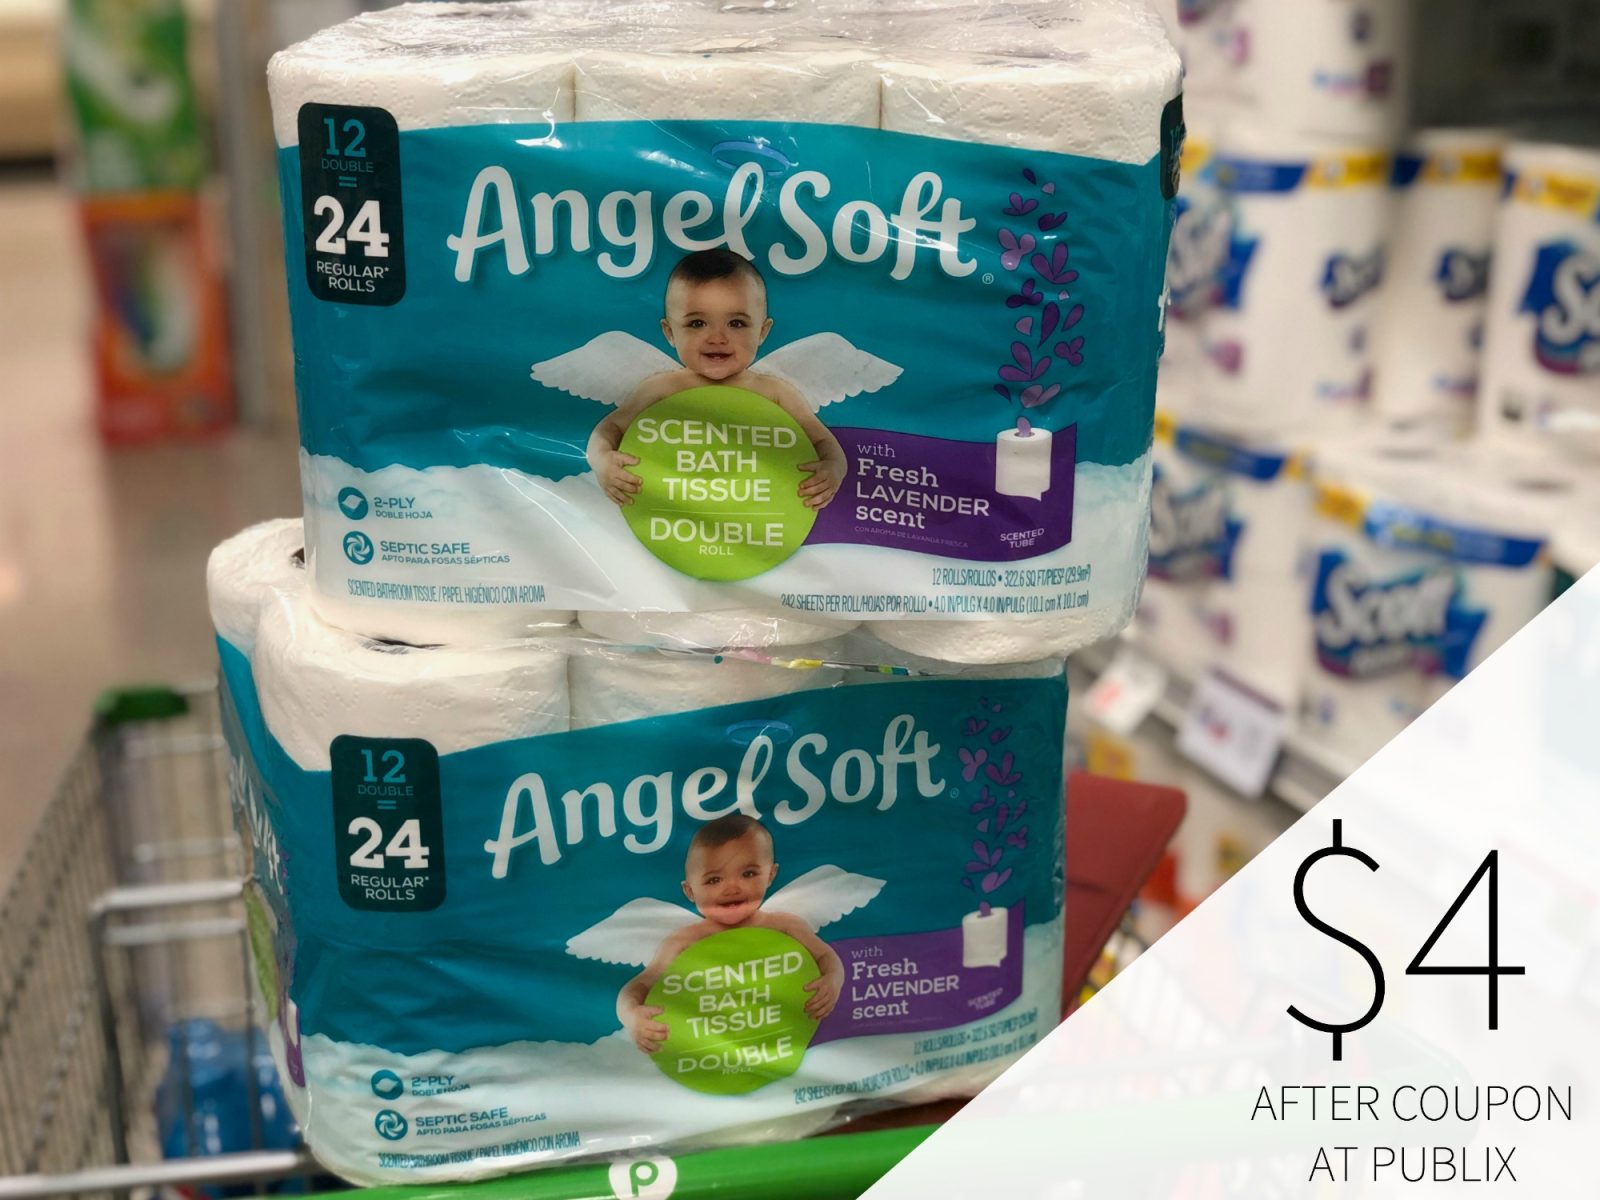 Can’t-Miss Deal On Angel Soft Bathroom Tissue At Publix – Try New Angel Soft With Fresh Lavender Scent